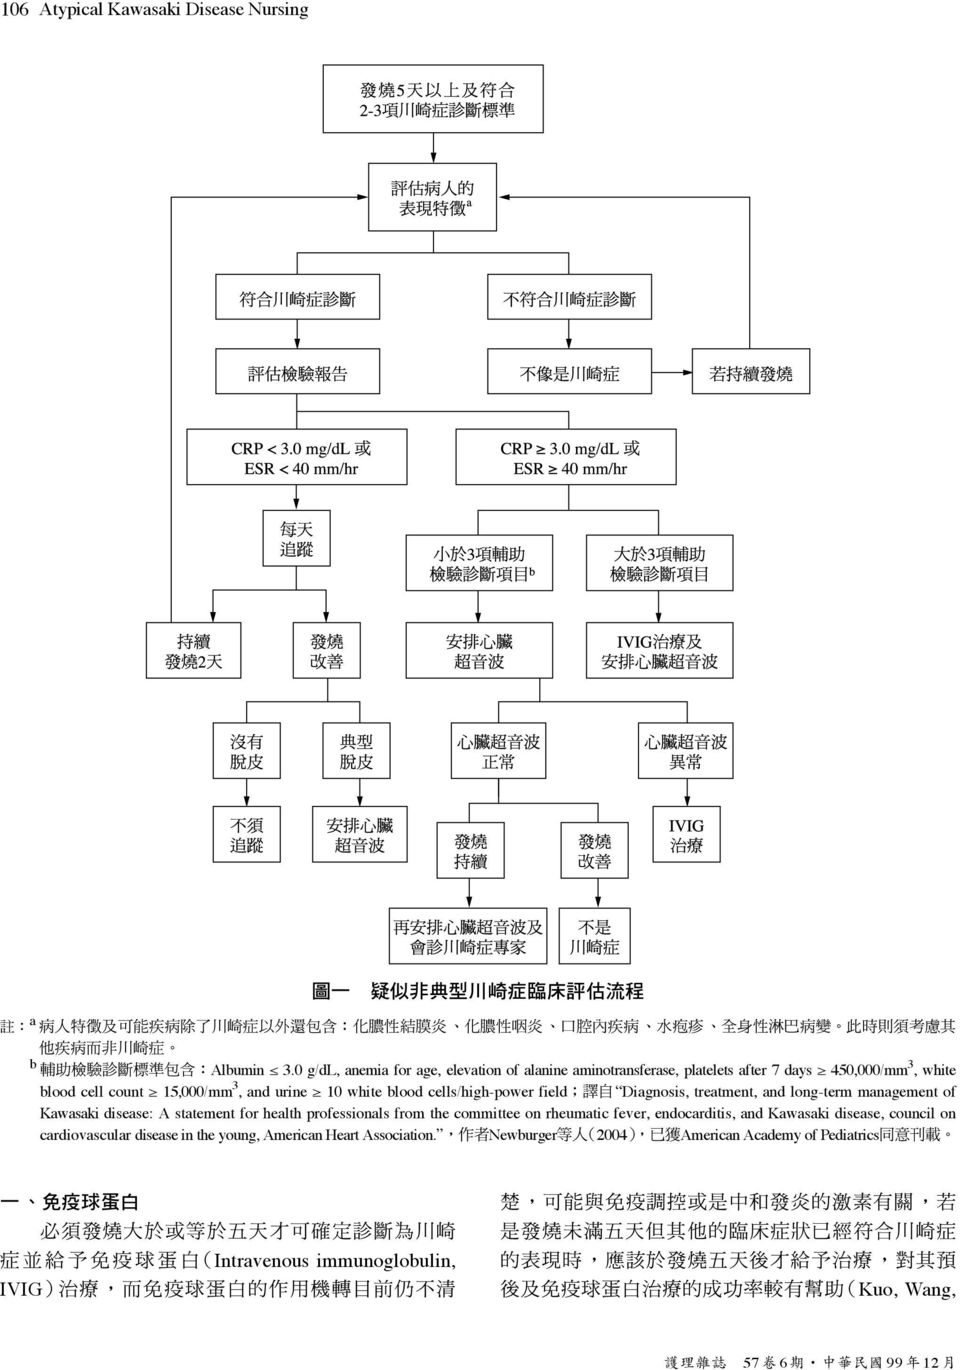 and urine 10 white blood cells/high-power field Diagnosis, treatment, and long-term management of Kawasaki disease: A statement for